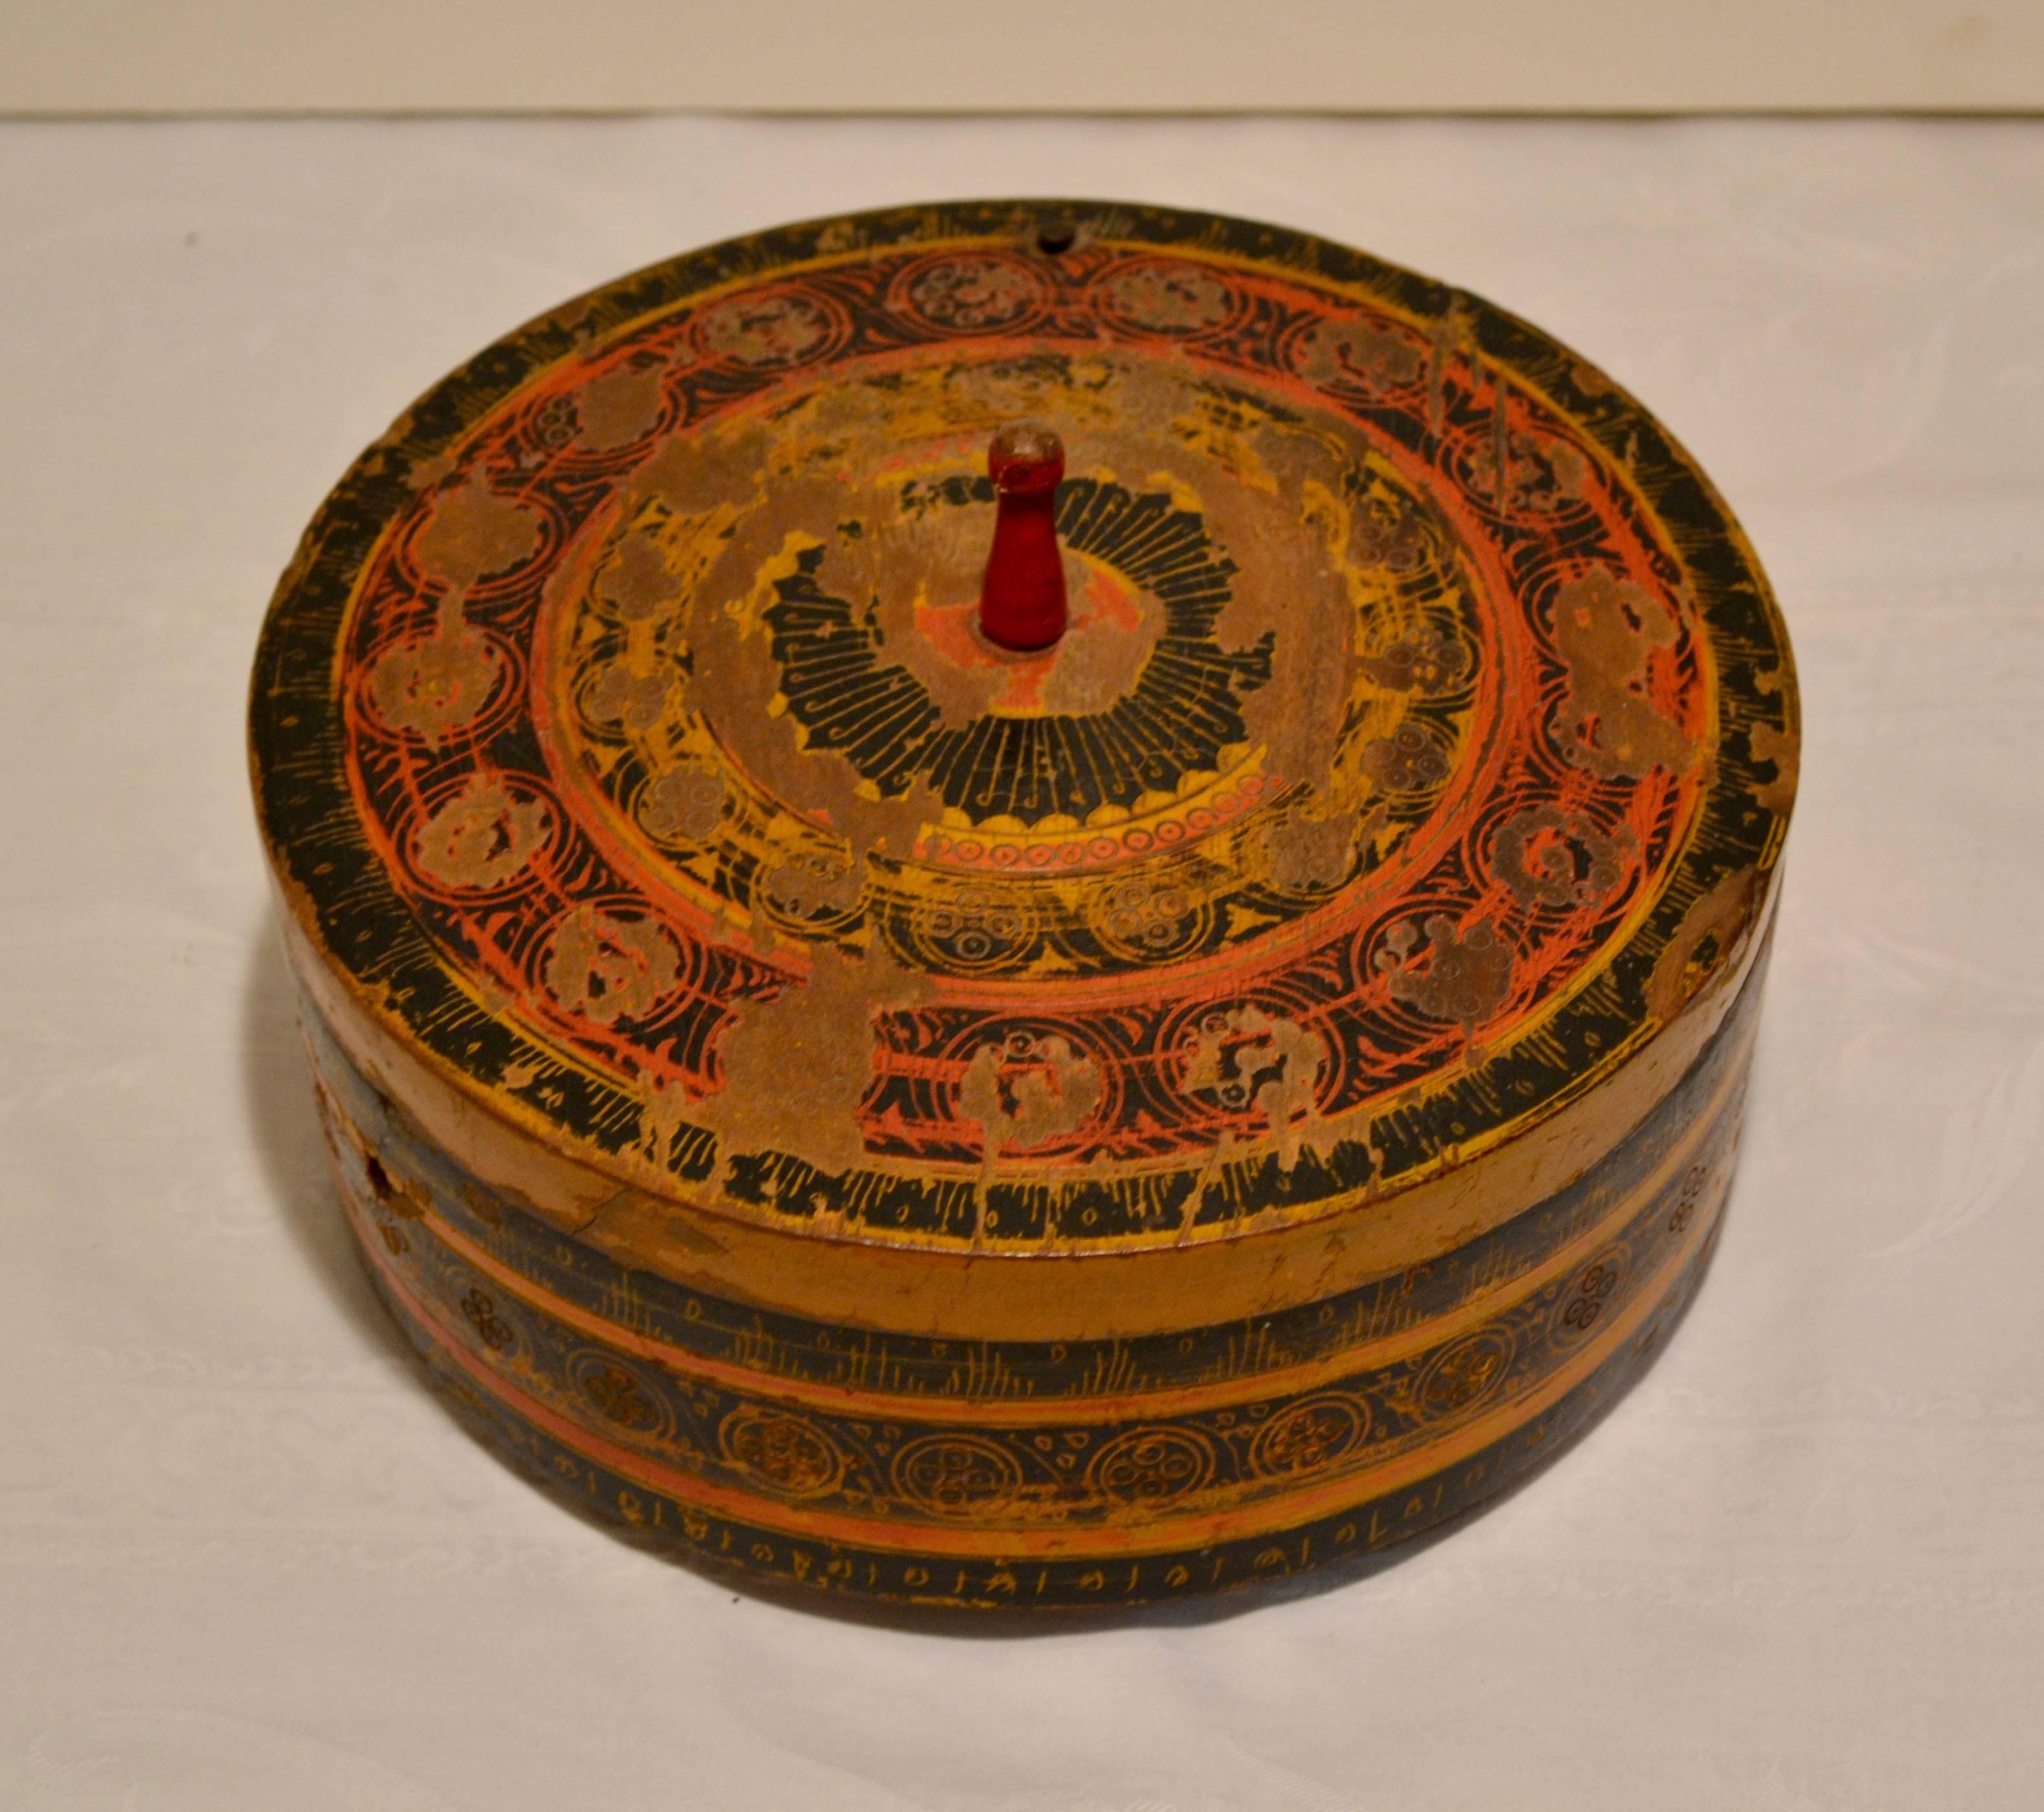 This is an unusual and hard to find Pakistani tribal spice box, hand-turned, with incised and hand-painted decoration in red gold and black. Larger than most pieces of its kind, the lid of this one pivots aside on a nail to reveal five hewn